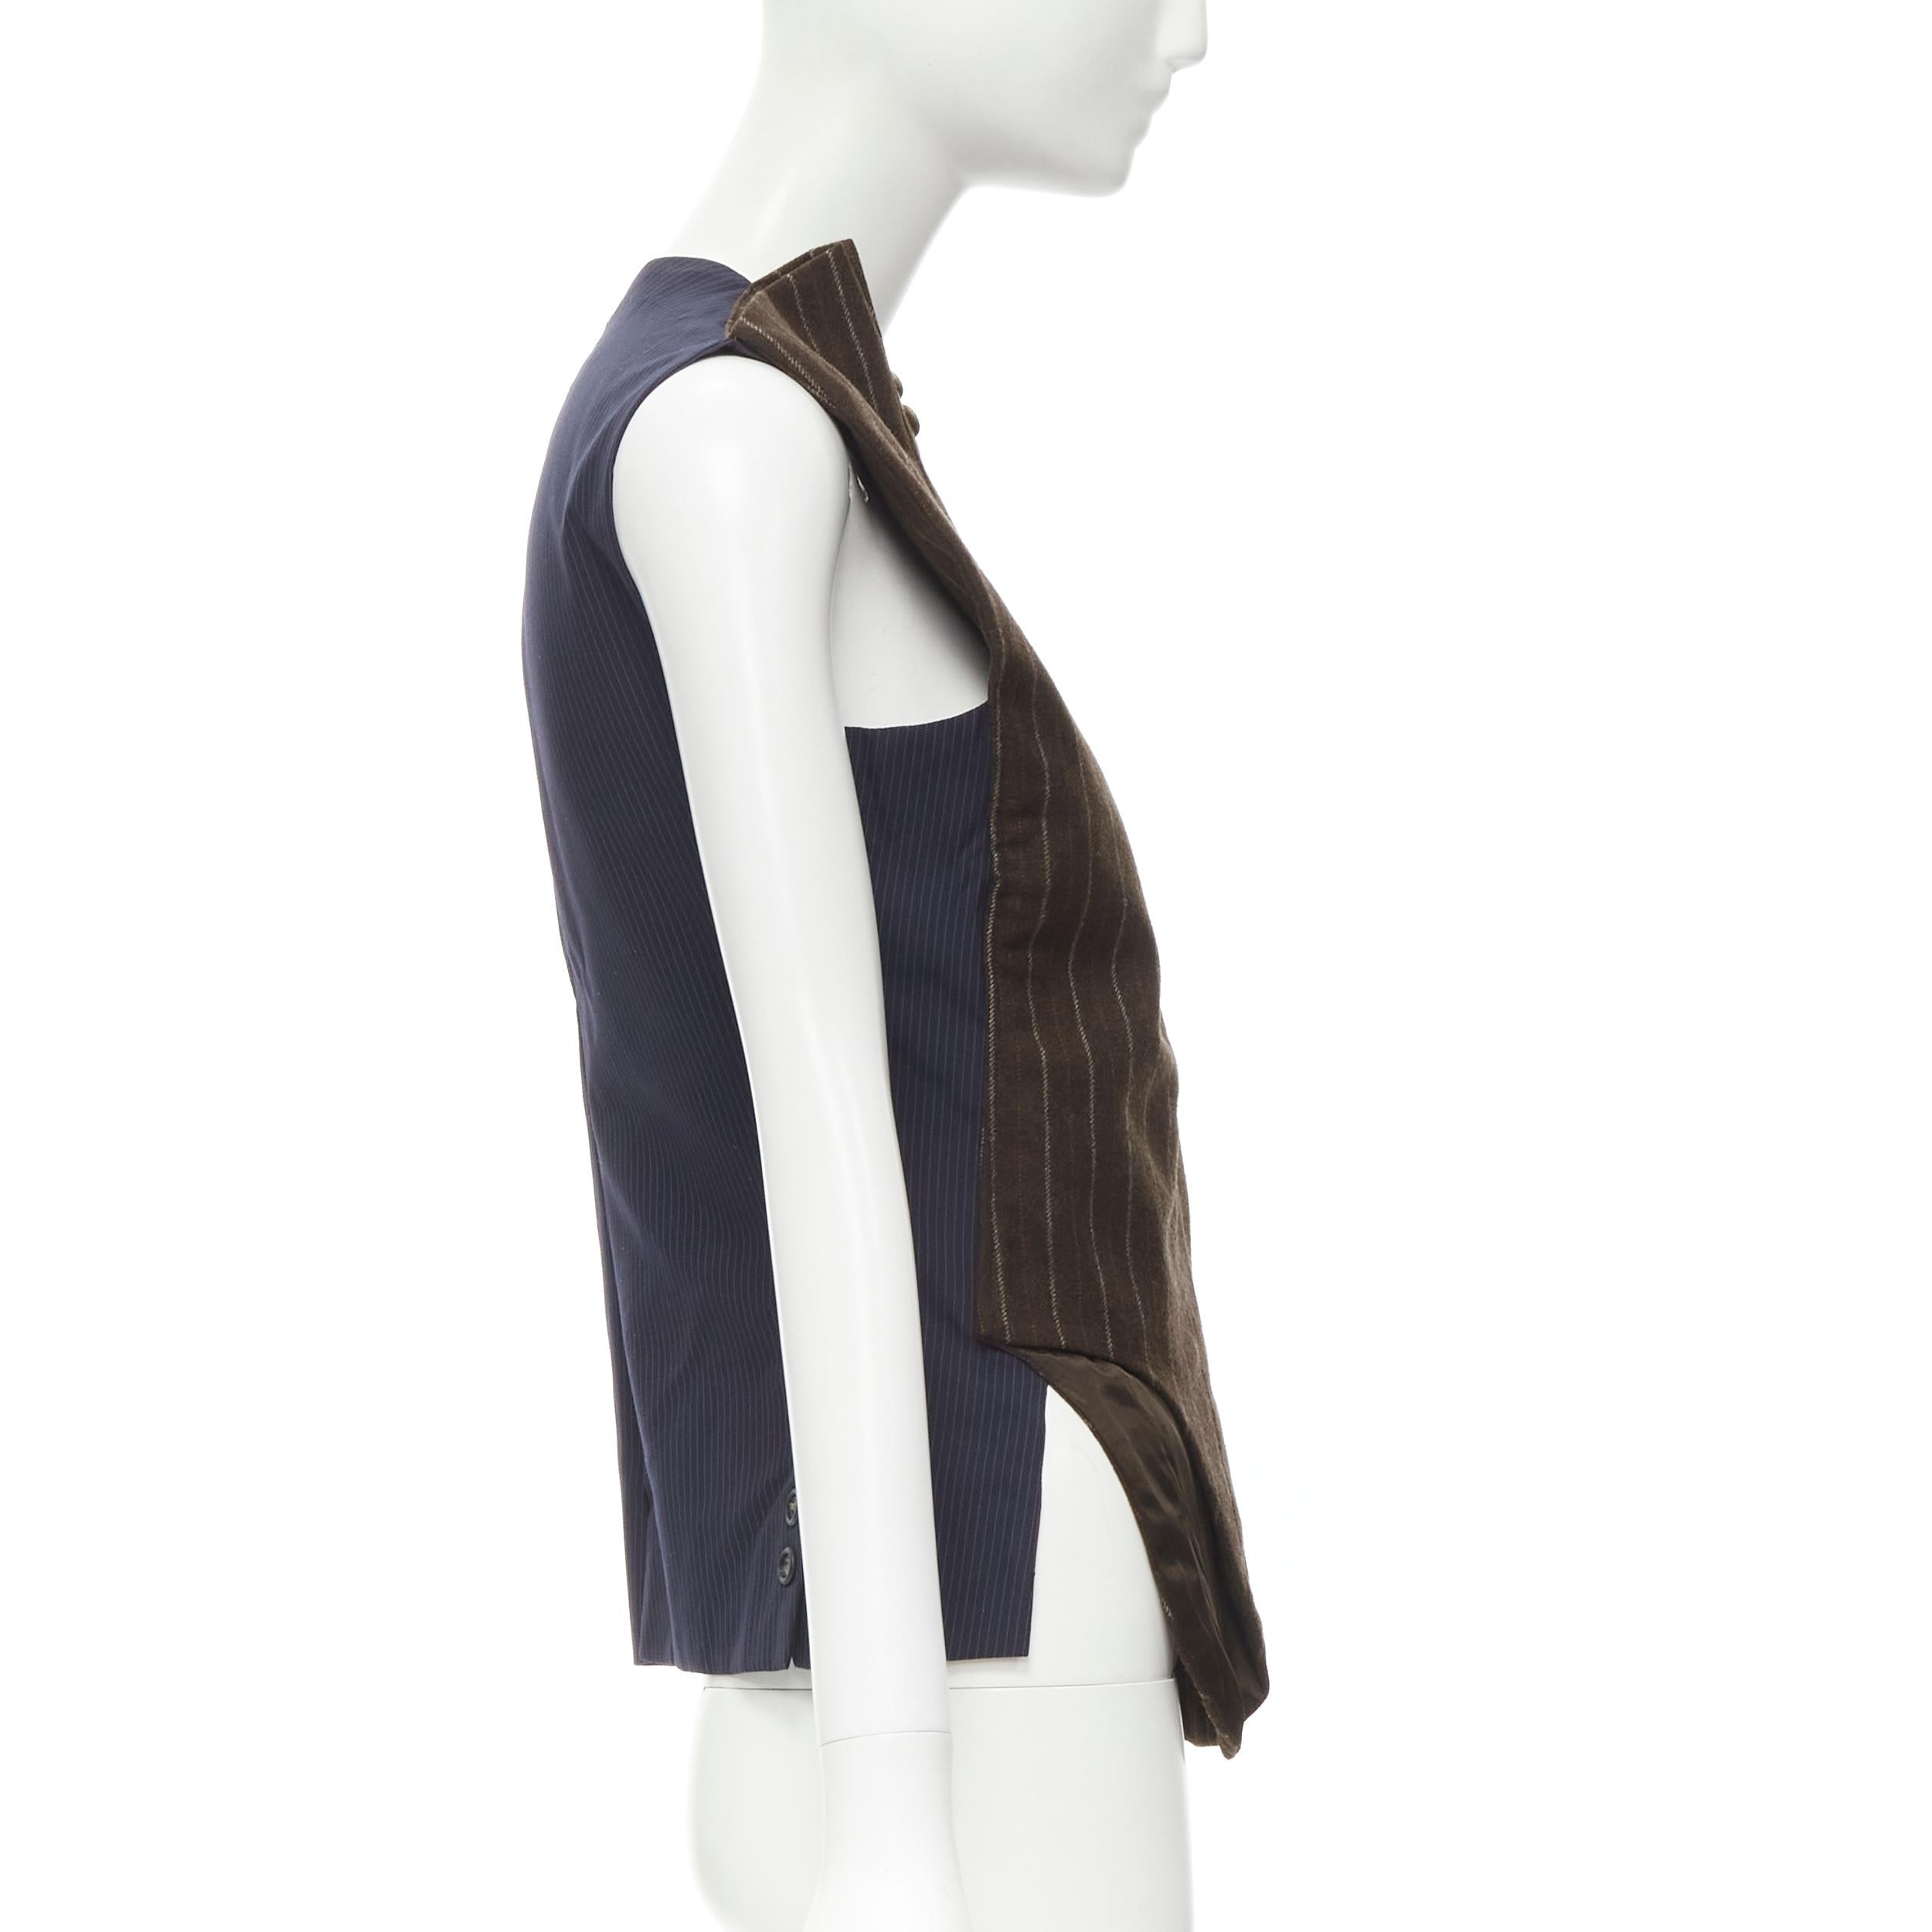 MAISON MARTIN MARGIELA ARTISANAL 2003 Runway brown deconstructed sleeves vest In Excellent Condition For Sale In Hong Kong, NT